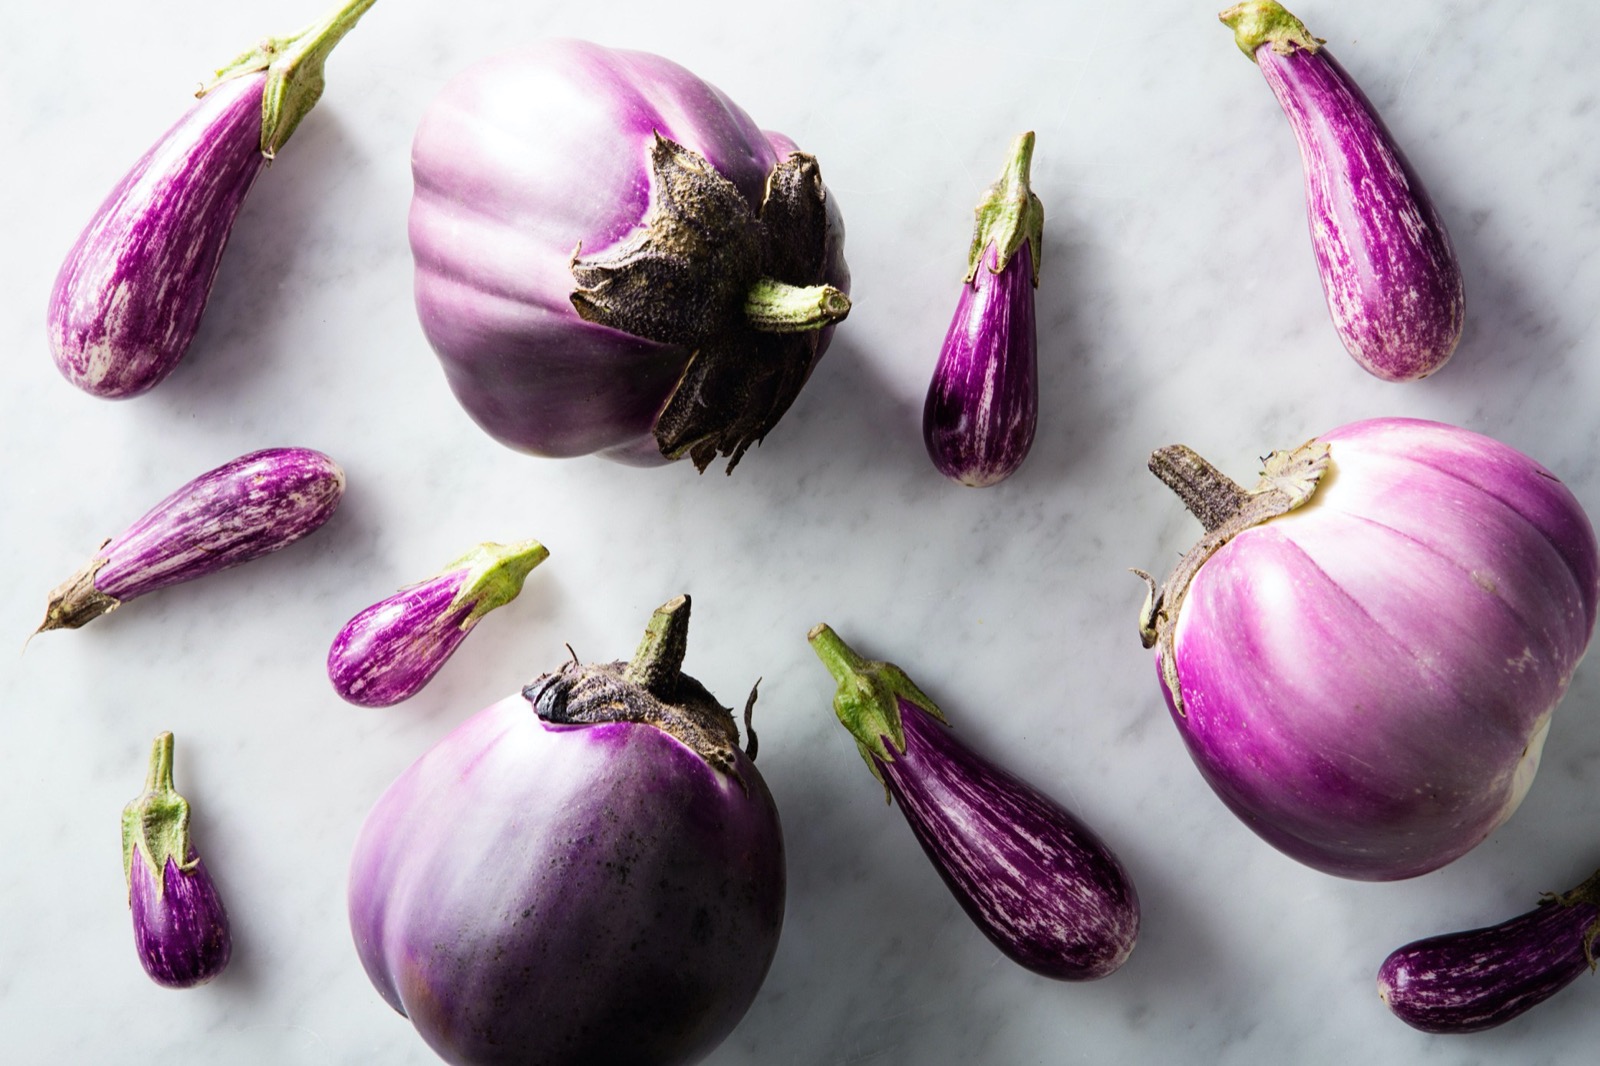 This General Knowledge Quiz Is Not That Hard, So to Impress Me, You’ll Need to Score 16/20 Eggplants